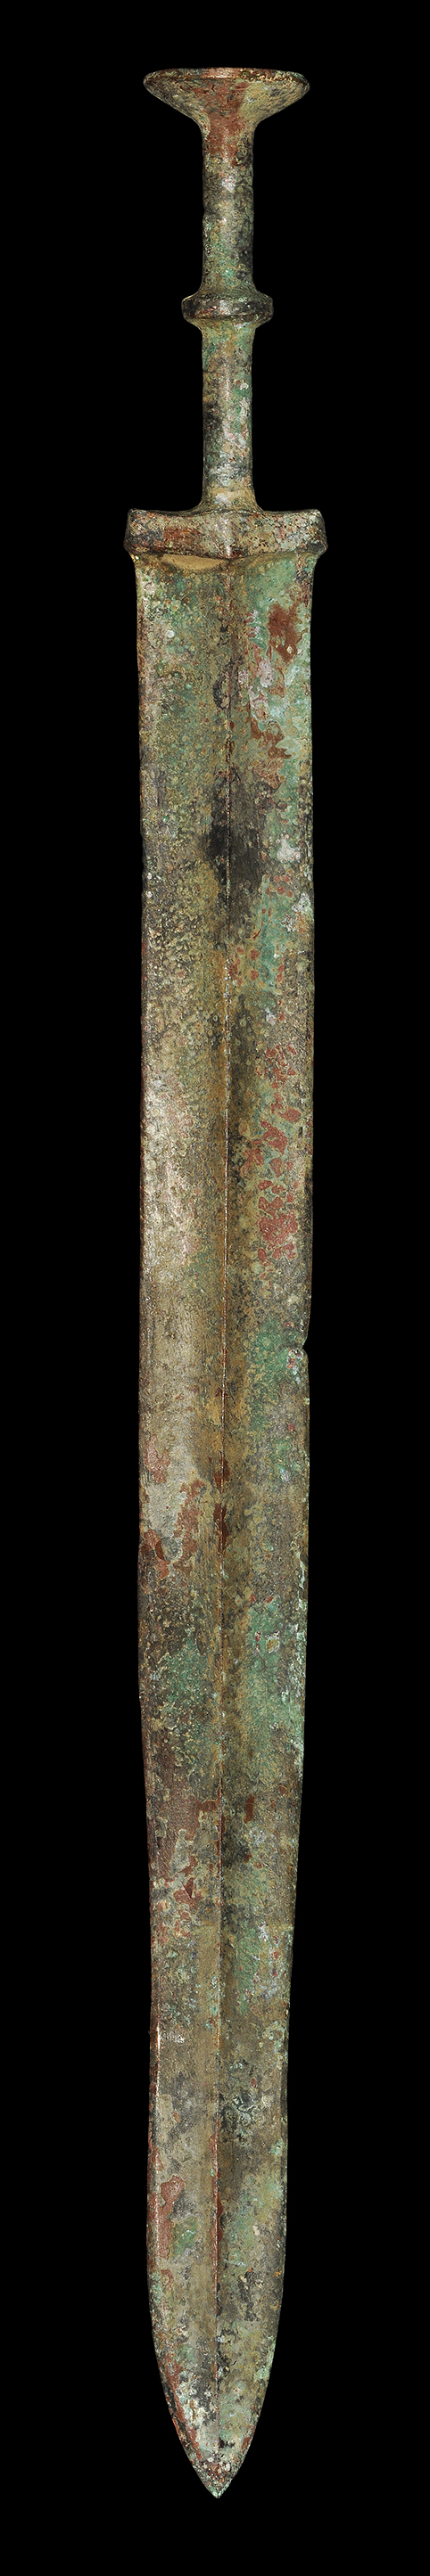 Chinese Bronze Sword with Discoid Pommel